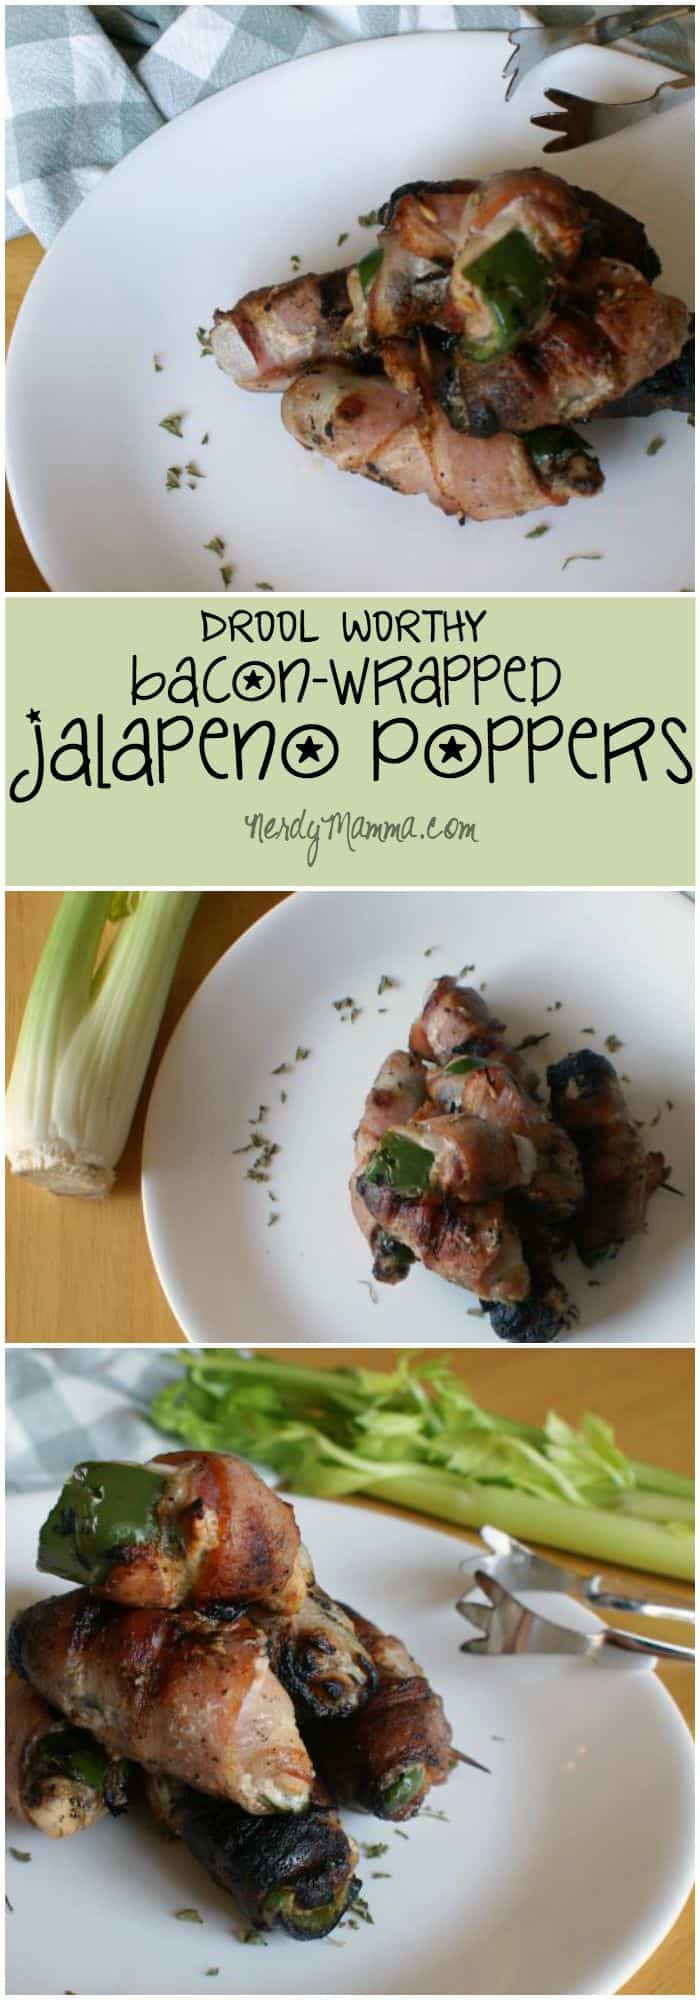 These bacon-wrapped jalapeno snack ideas are so easy and yummy!